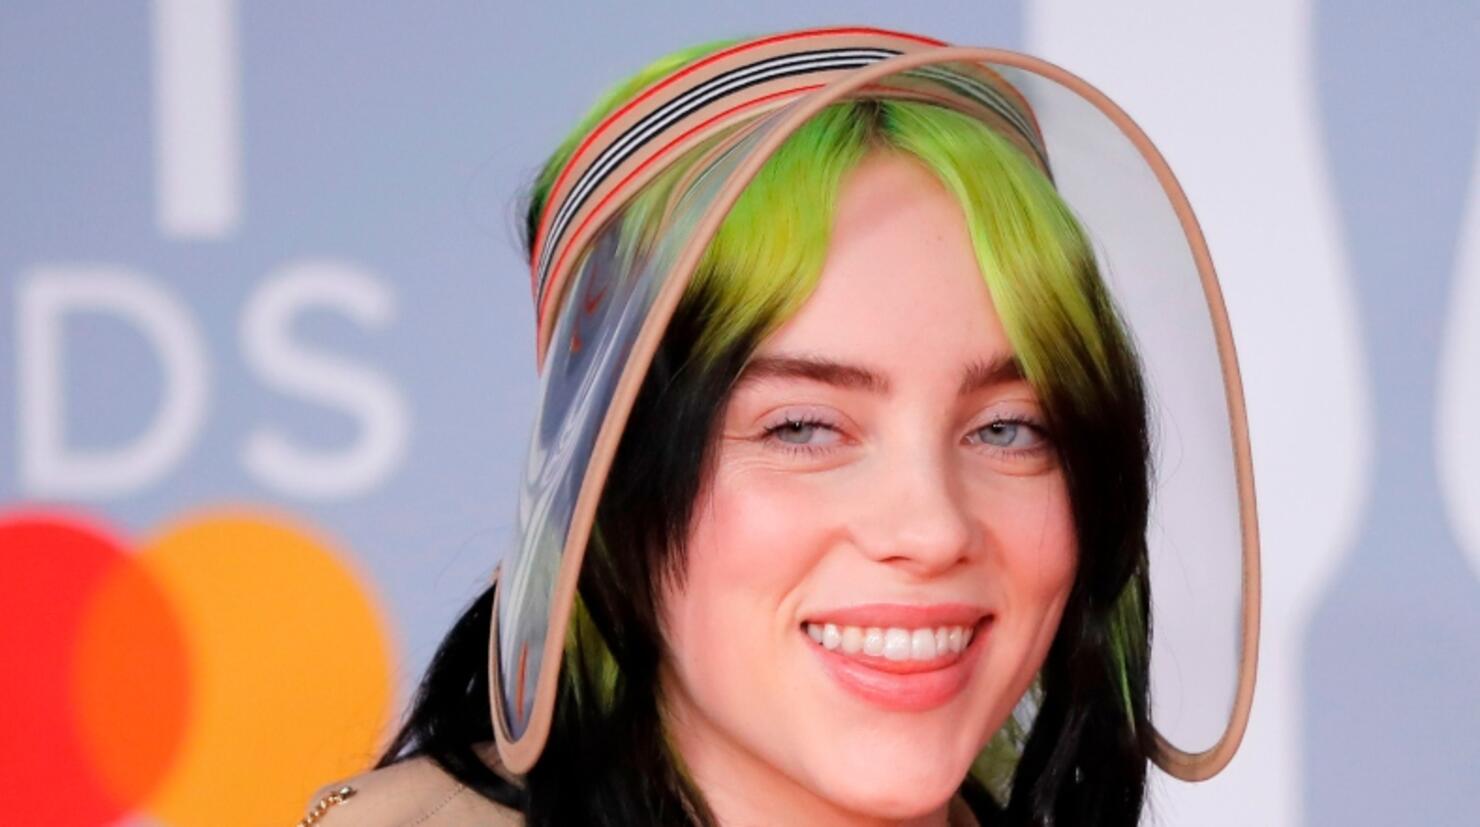 You Can Now Own Billie Eilish's Yellow Rainsuit From The 'Bellyache' Video  | iHeart